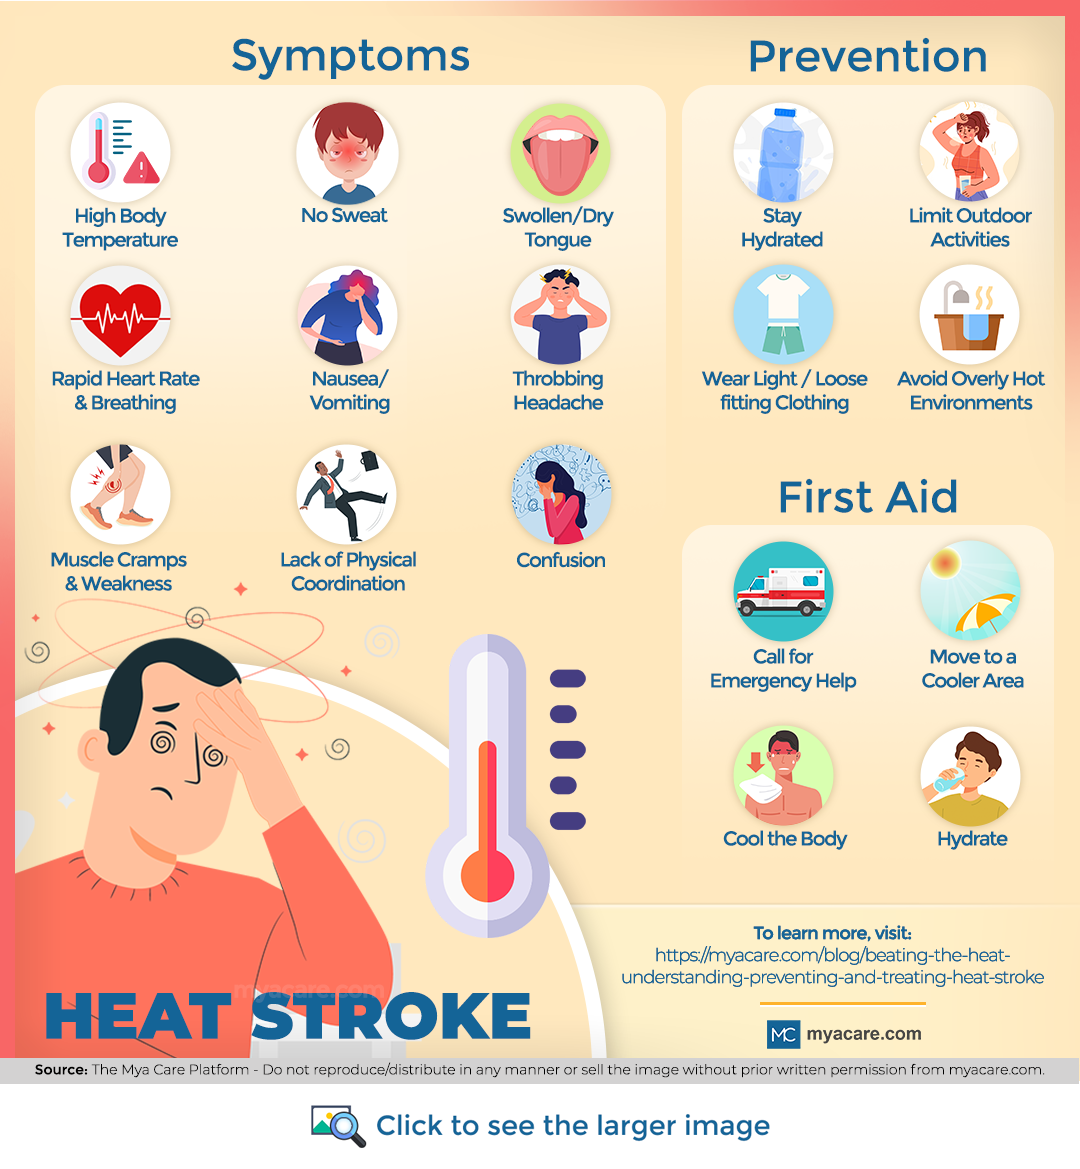 Heat Stroke - Symptoms(high temp,headache,rapid heart rate,confusion),Prevention(Hydration,loose clothing),First Aid tips